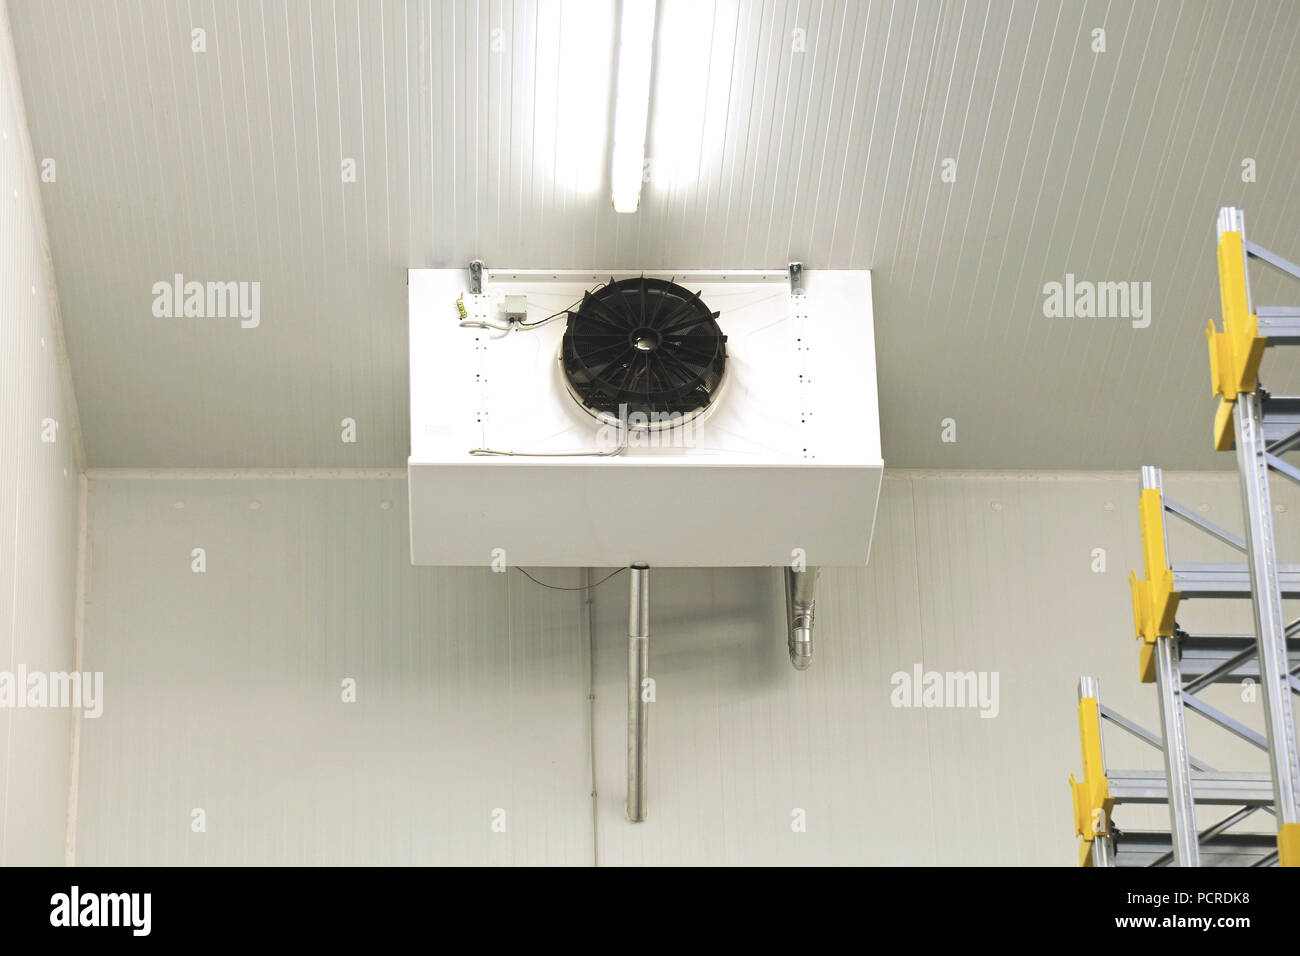 Industrial air conditioner refrigeration cooling system in warehouse Stock Photo